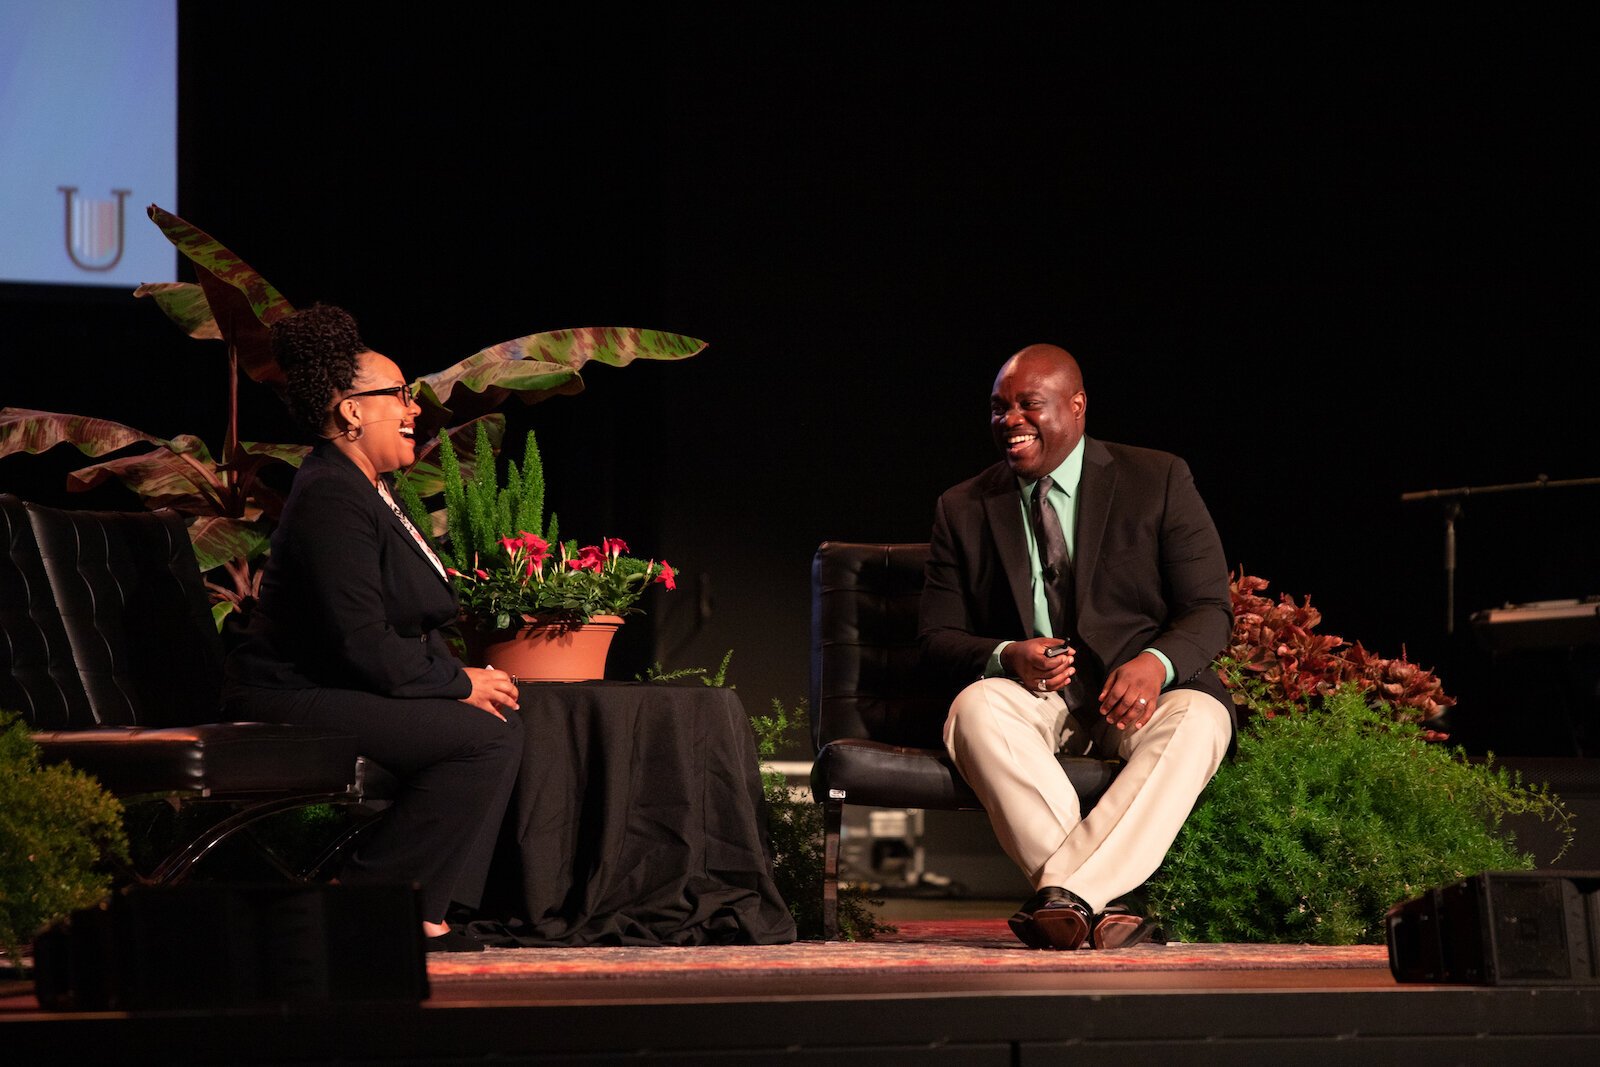 Dr. Losambe, right, leads a United Front keynote session in July at the Clyde Theatre at 1808 Bluffton Rd.